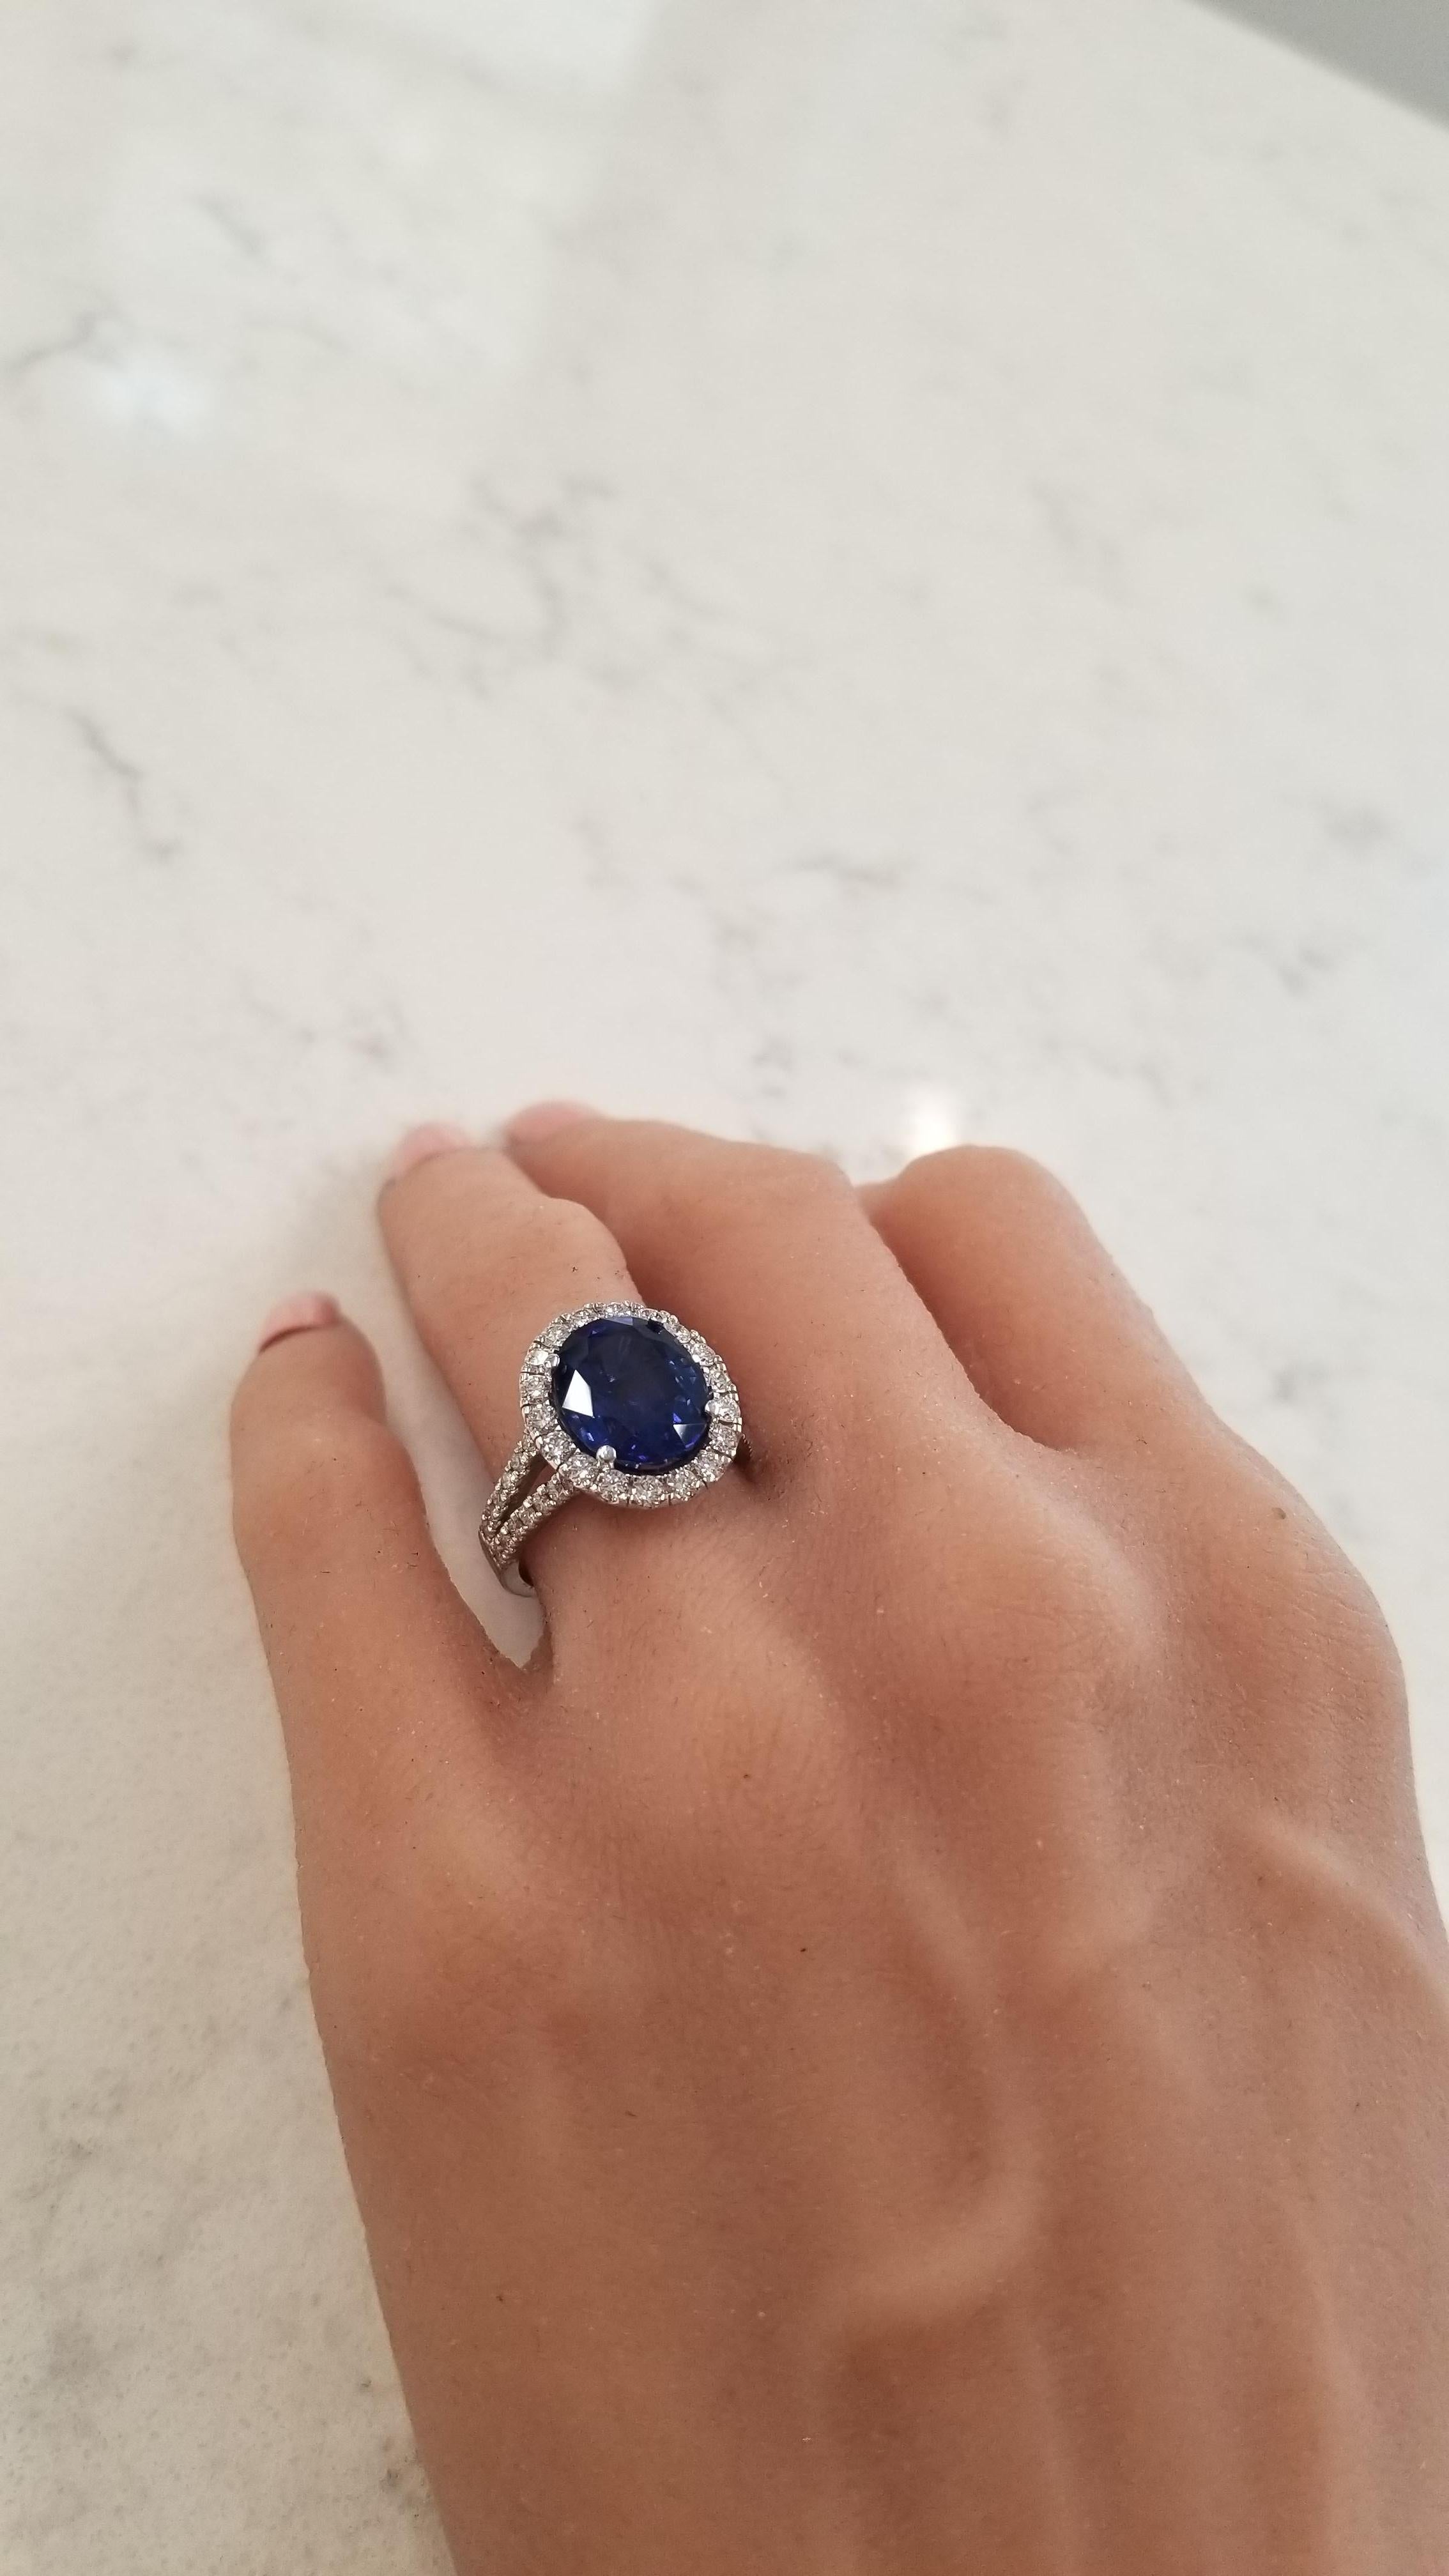 Oval Cut GRS Certified 6.18 Carat Oval Sapphire & Diamond Cocktail Ring In 18K White Gold